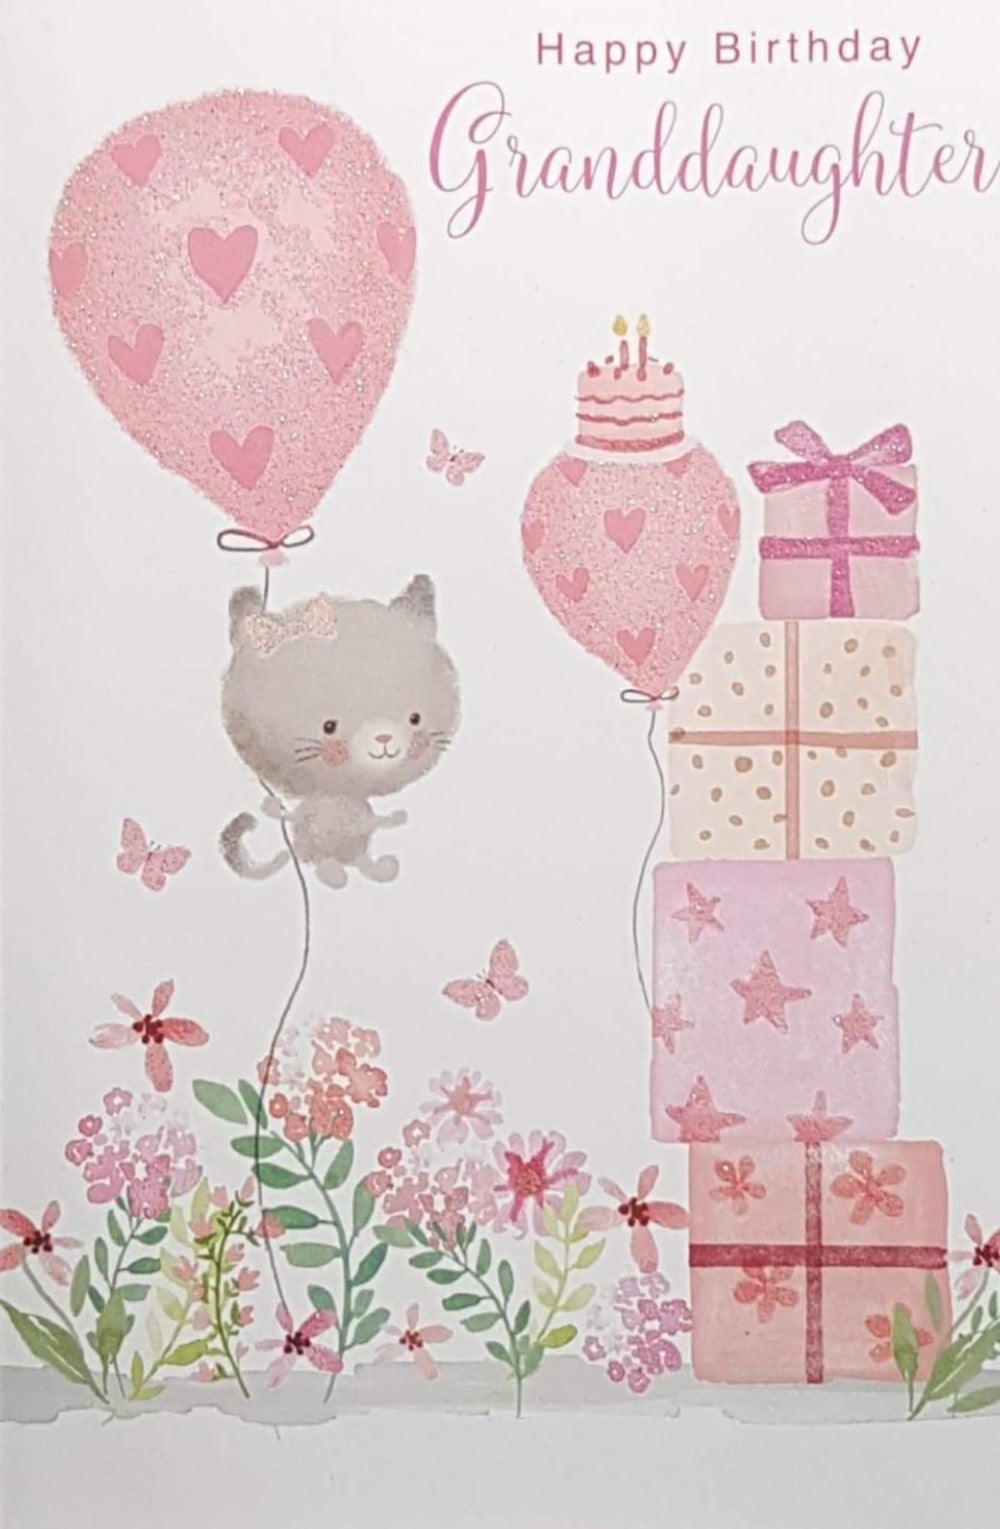 Birthday Card - Grandaughter / Happy Kitten Holding Pink Balloon Looking At The Gifts Tower